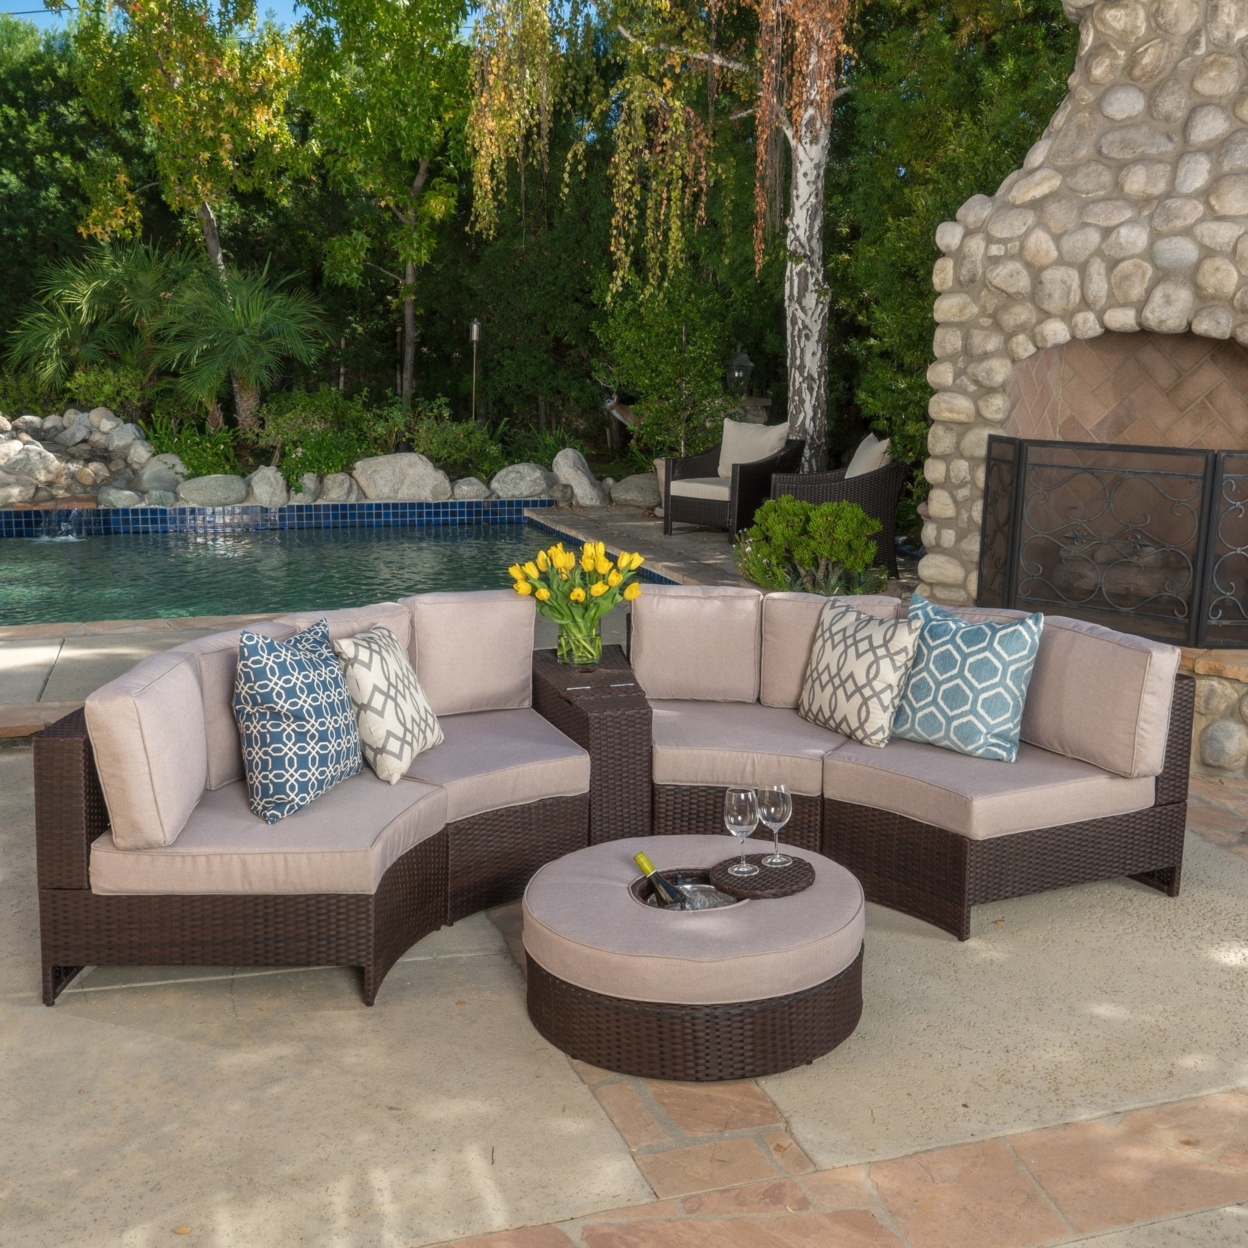 Riviera 6pc Outdoor Sectional Sofa Set With Storage Trunk & Ice Bucket - Beige